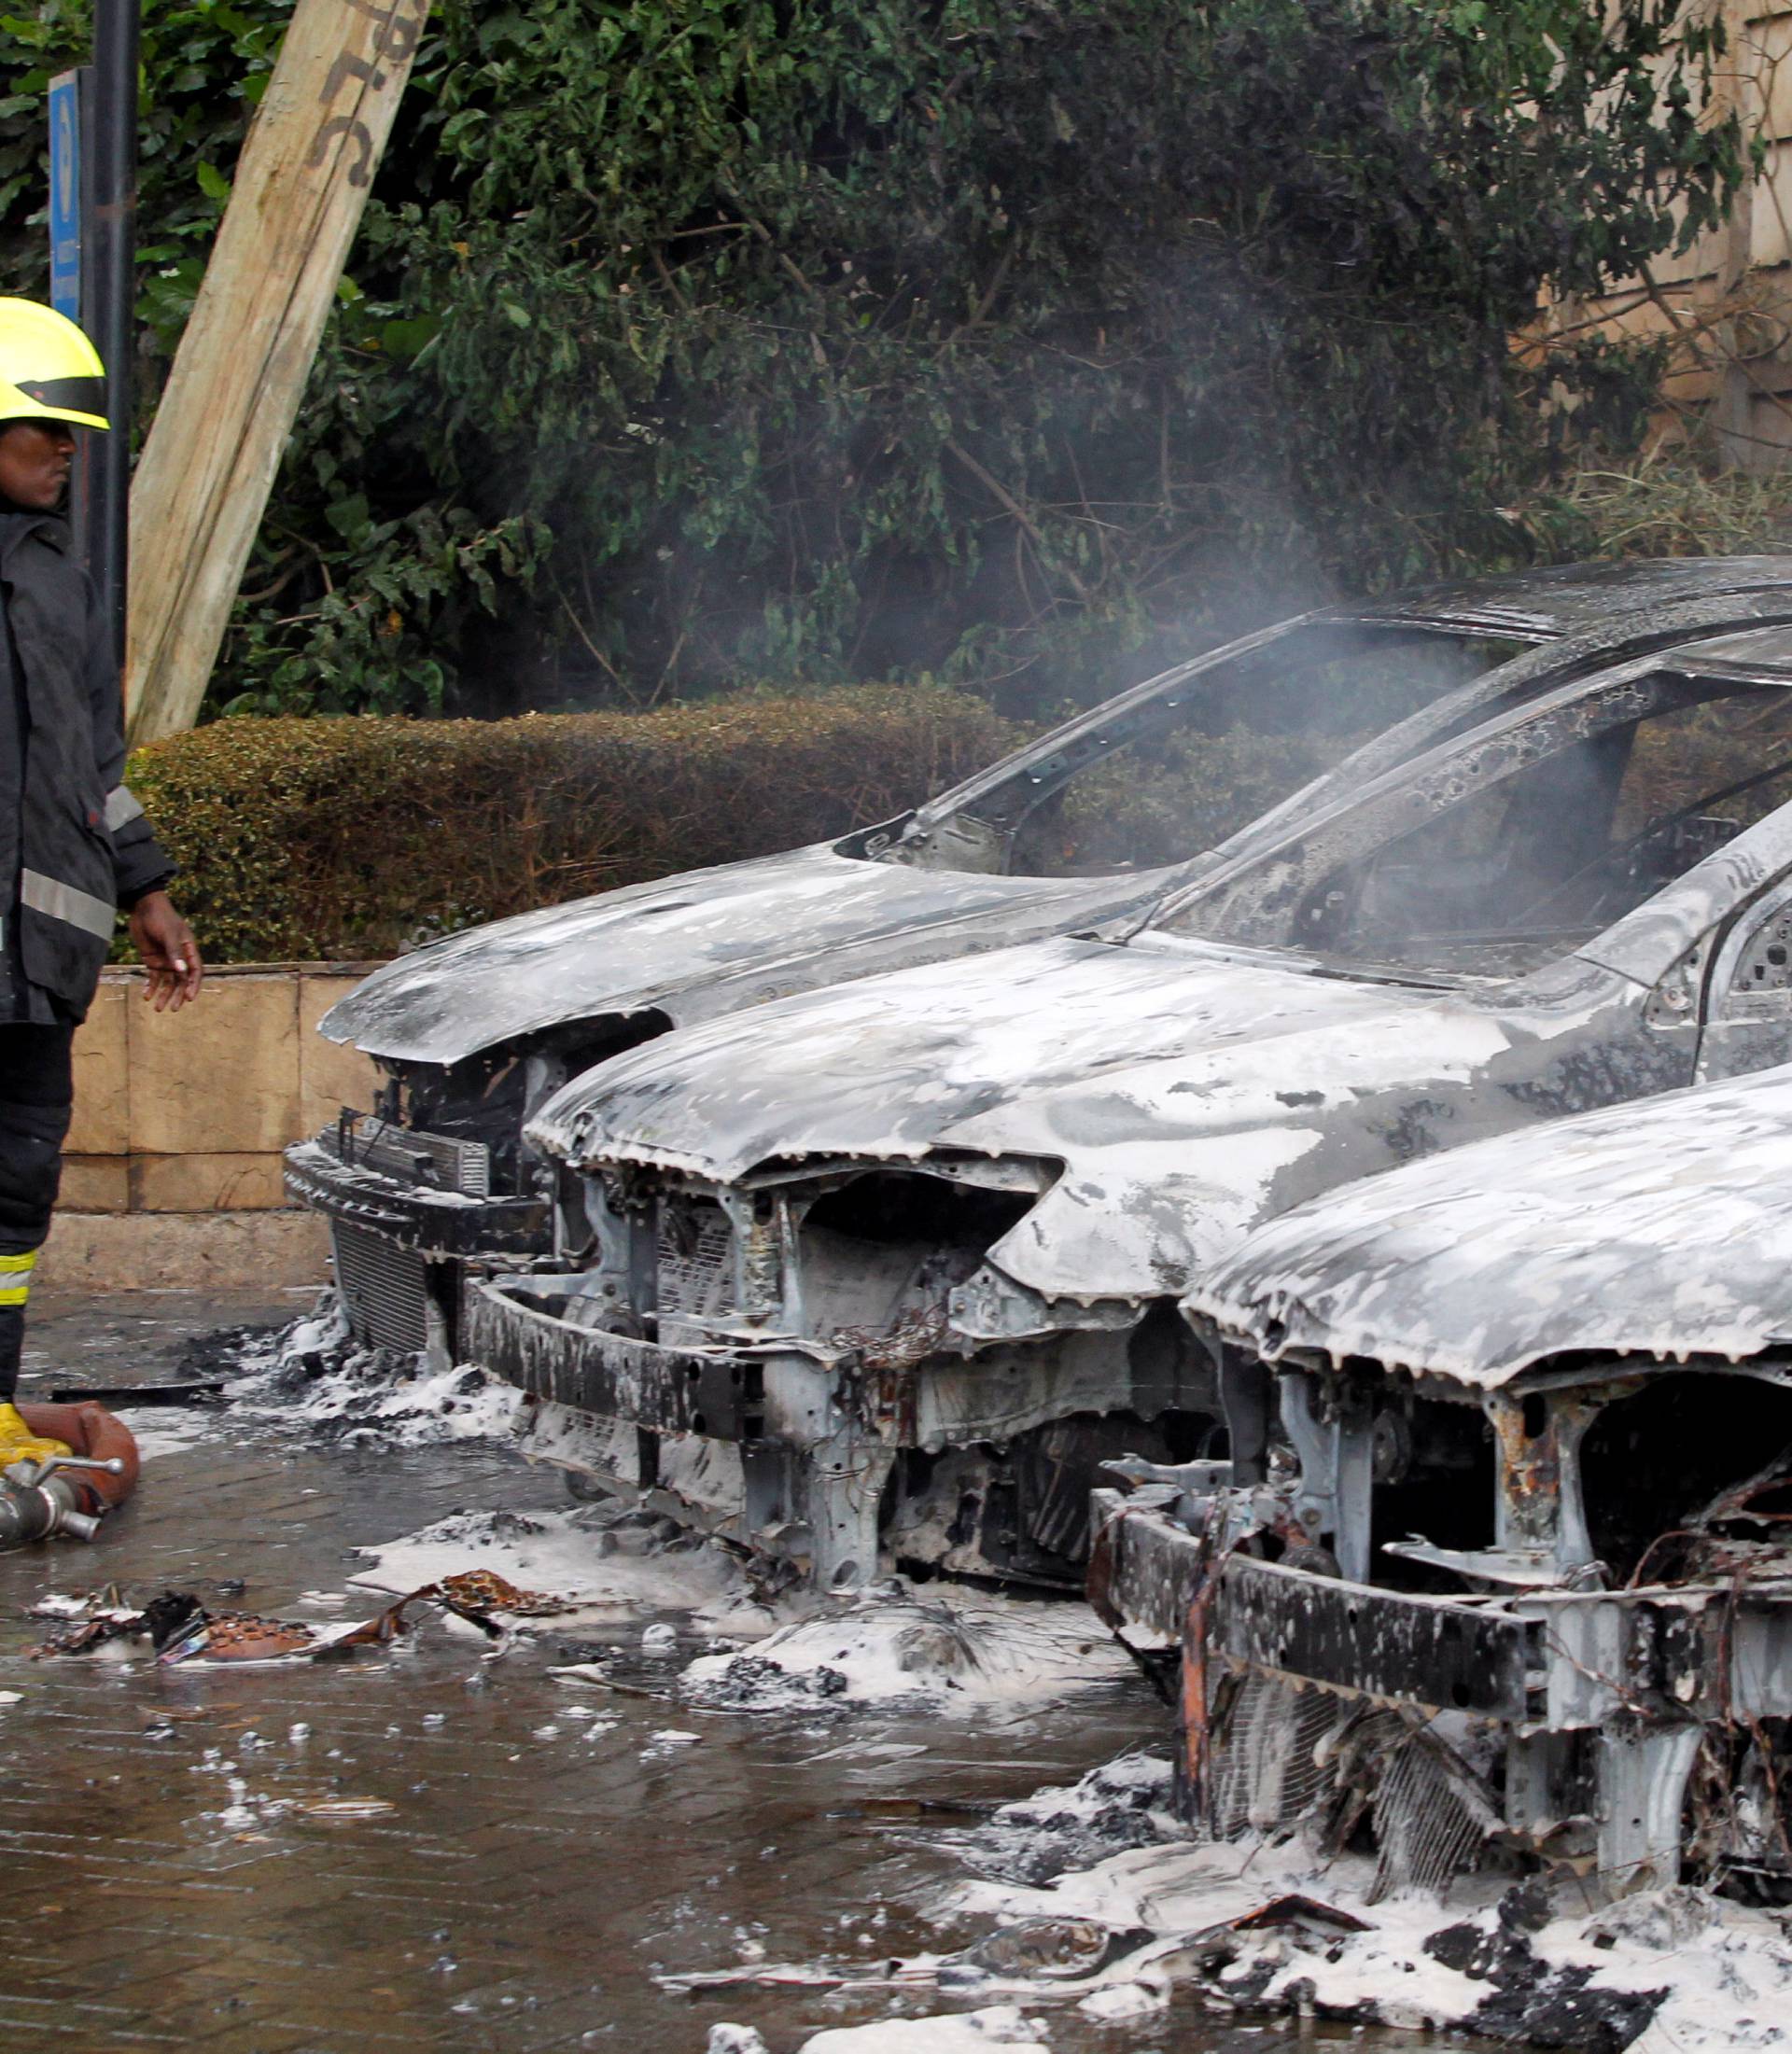 A firefighter stands near burnt vehicles at the scene where explosions and gunshots were heard at the Dusit hotel compound, in Nairobi